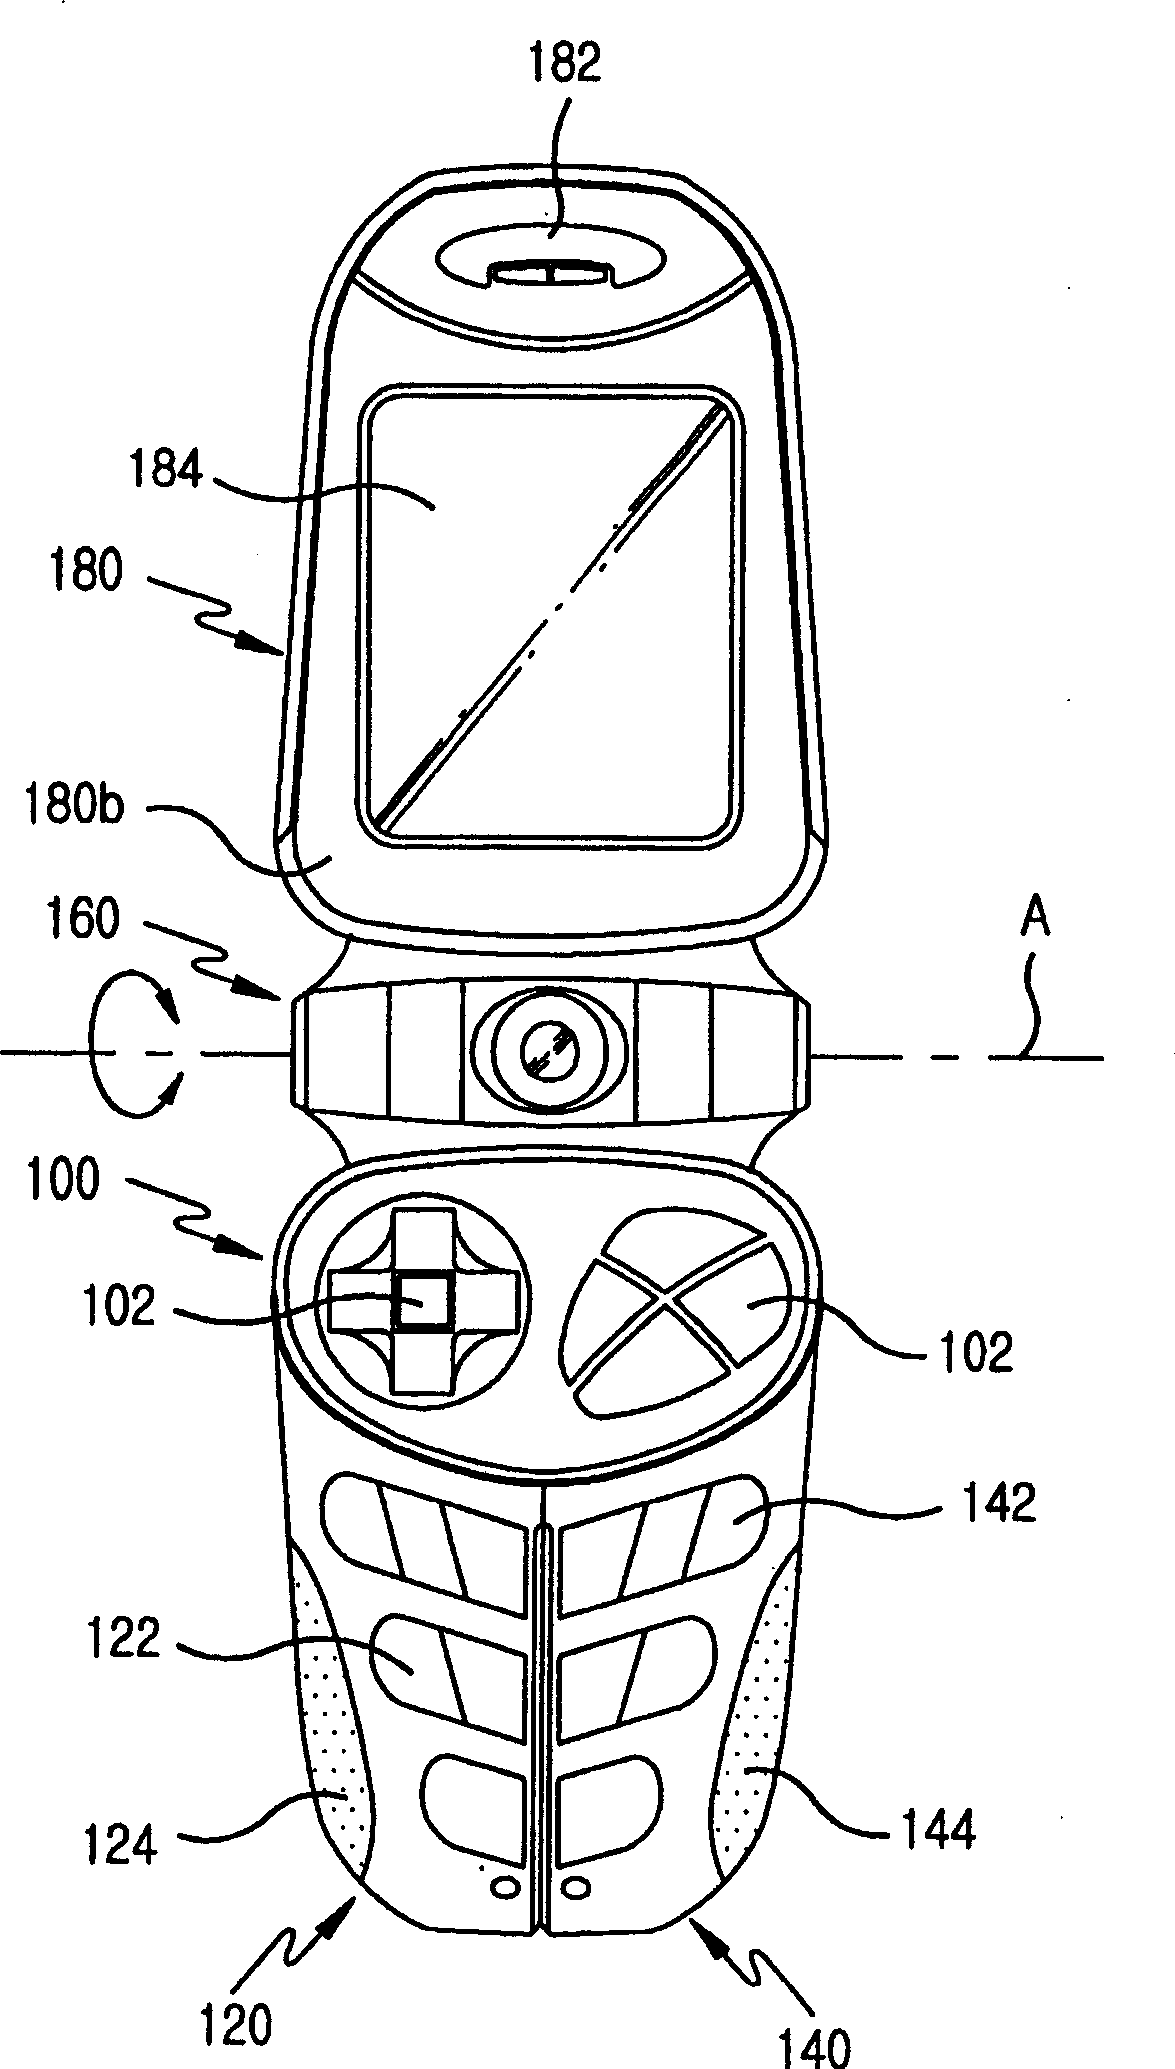 Portable game/communication device